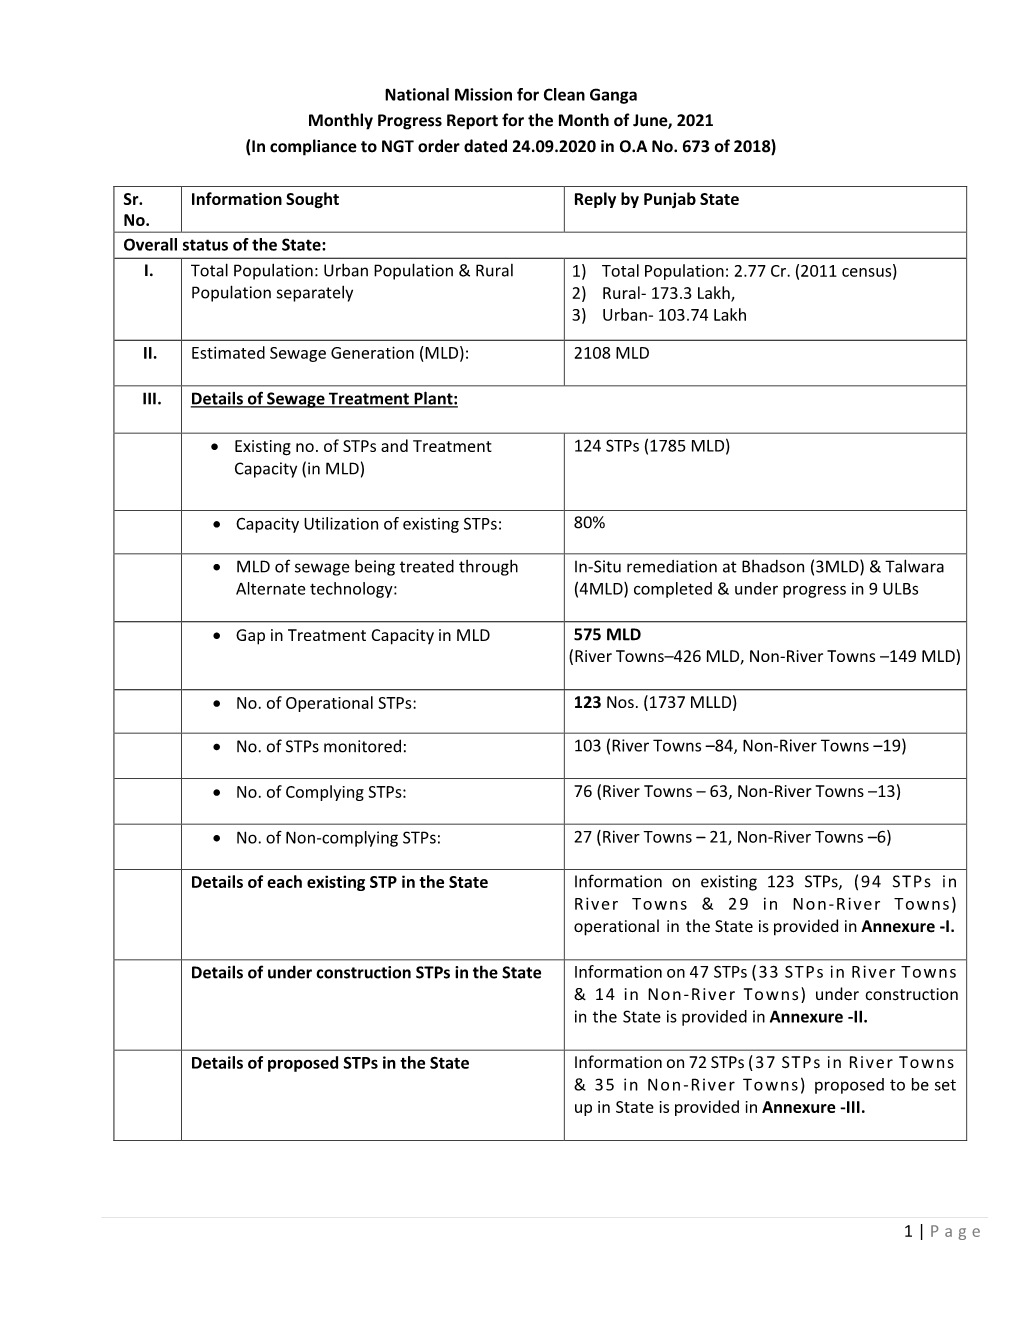 1 | Page National Mission for Clean Ganga Monthly Progress Report for the Month of June, 2021 (In Compliance to NGT Order Dated